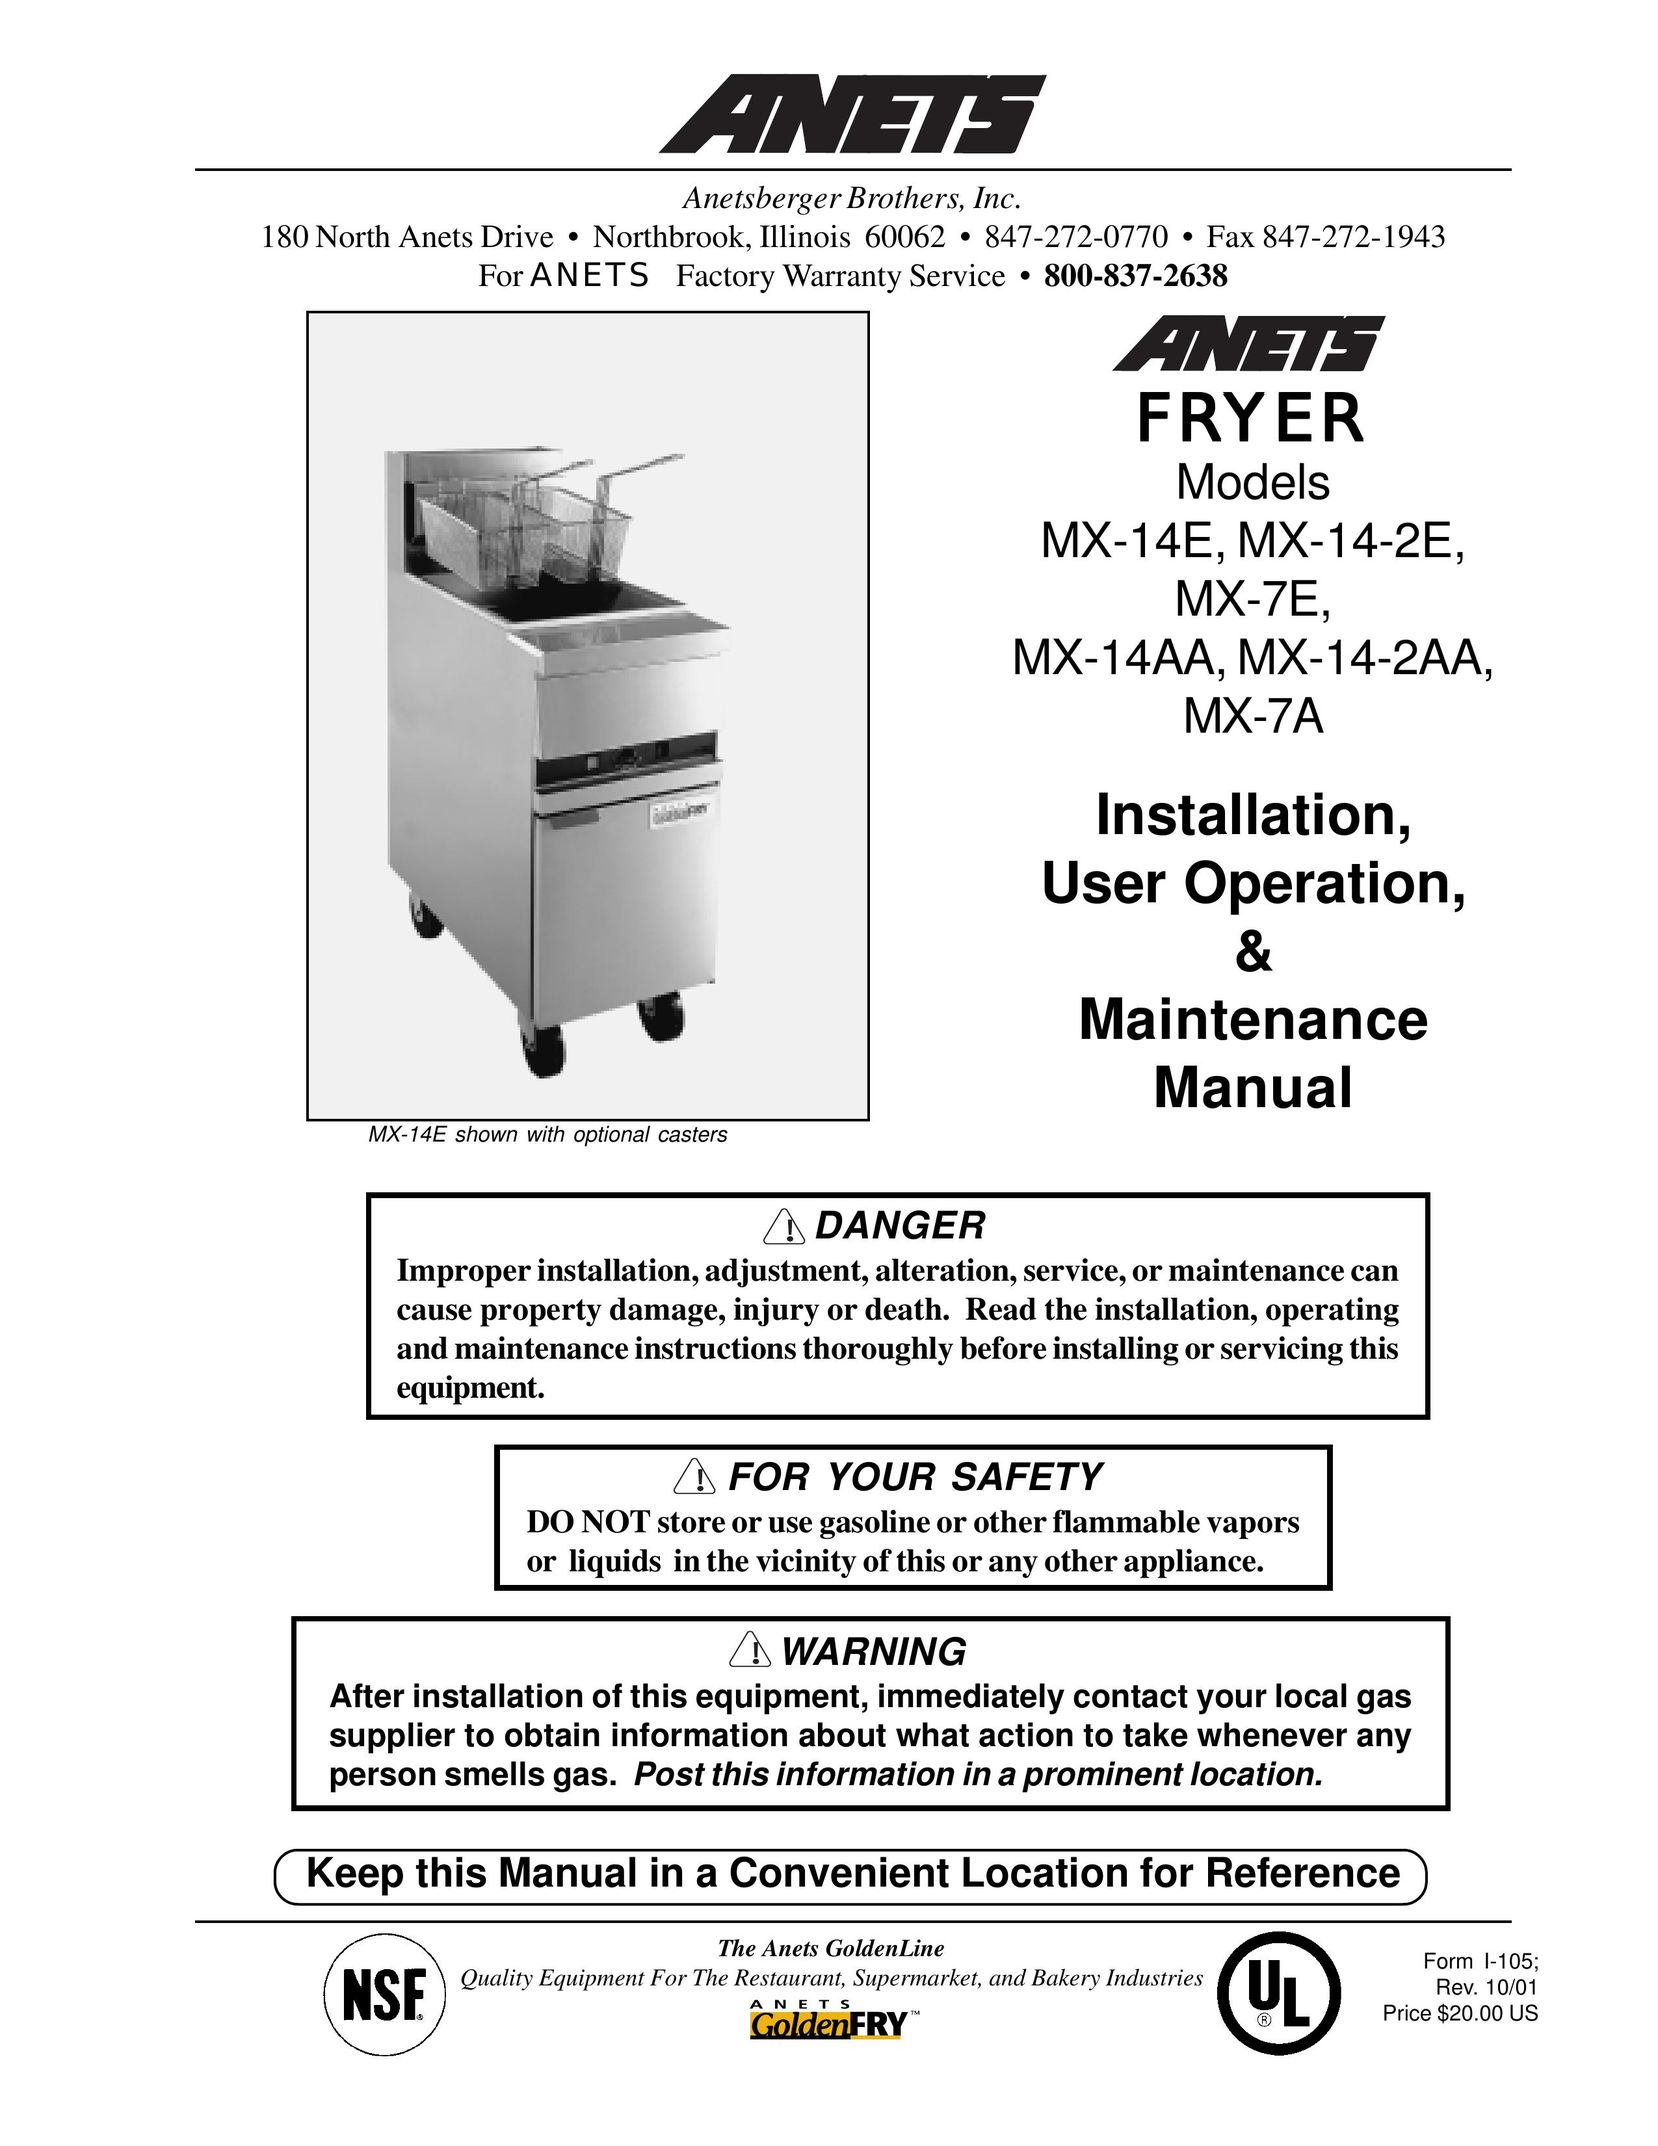 Anetsberger Brothers MX-7A Fryer User Manual